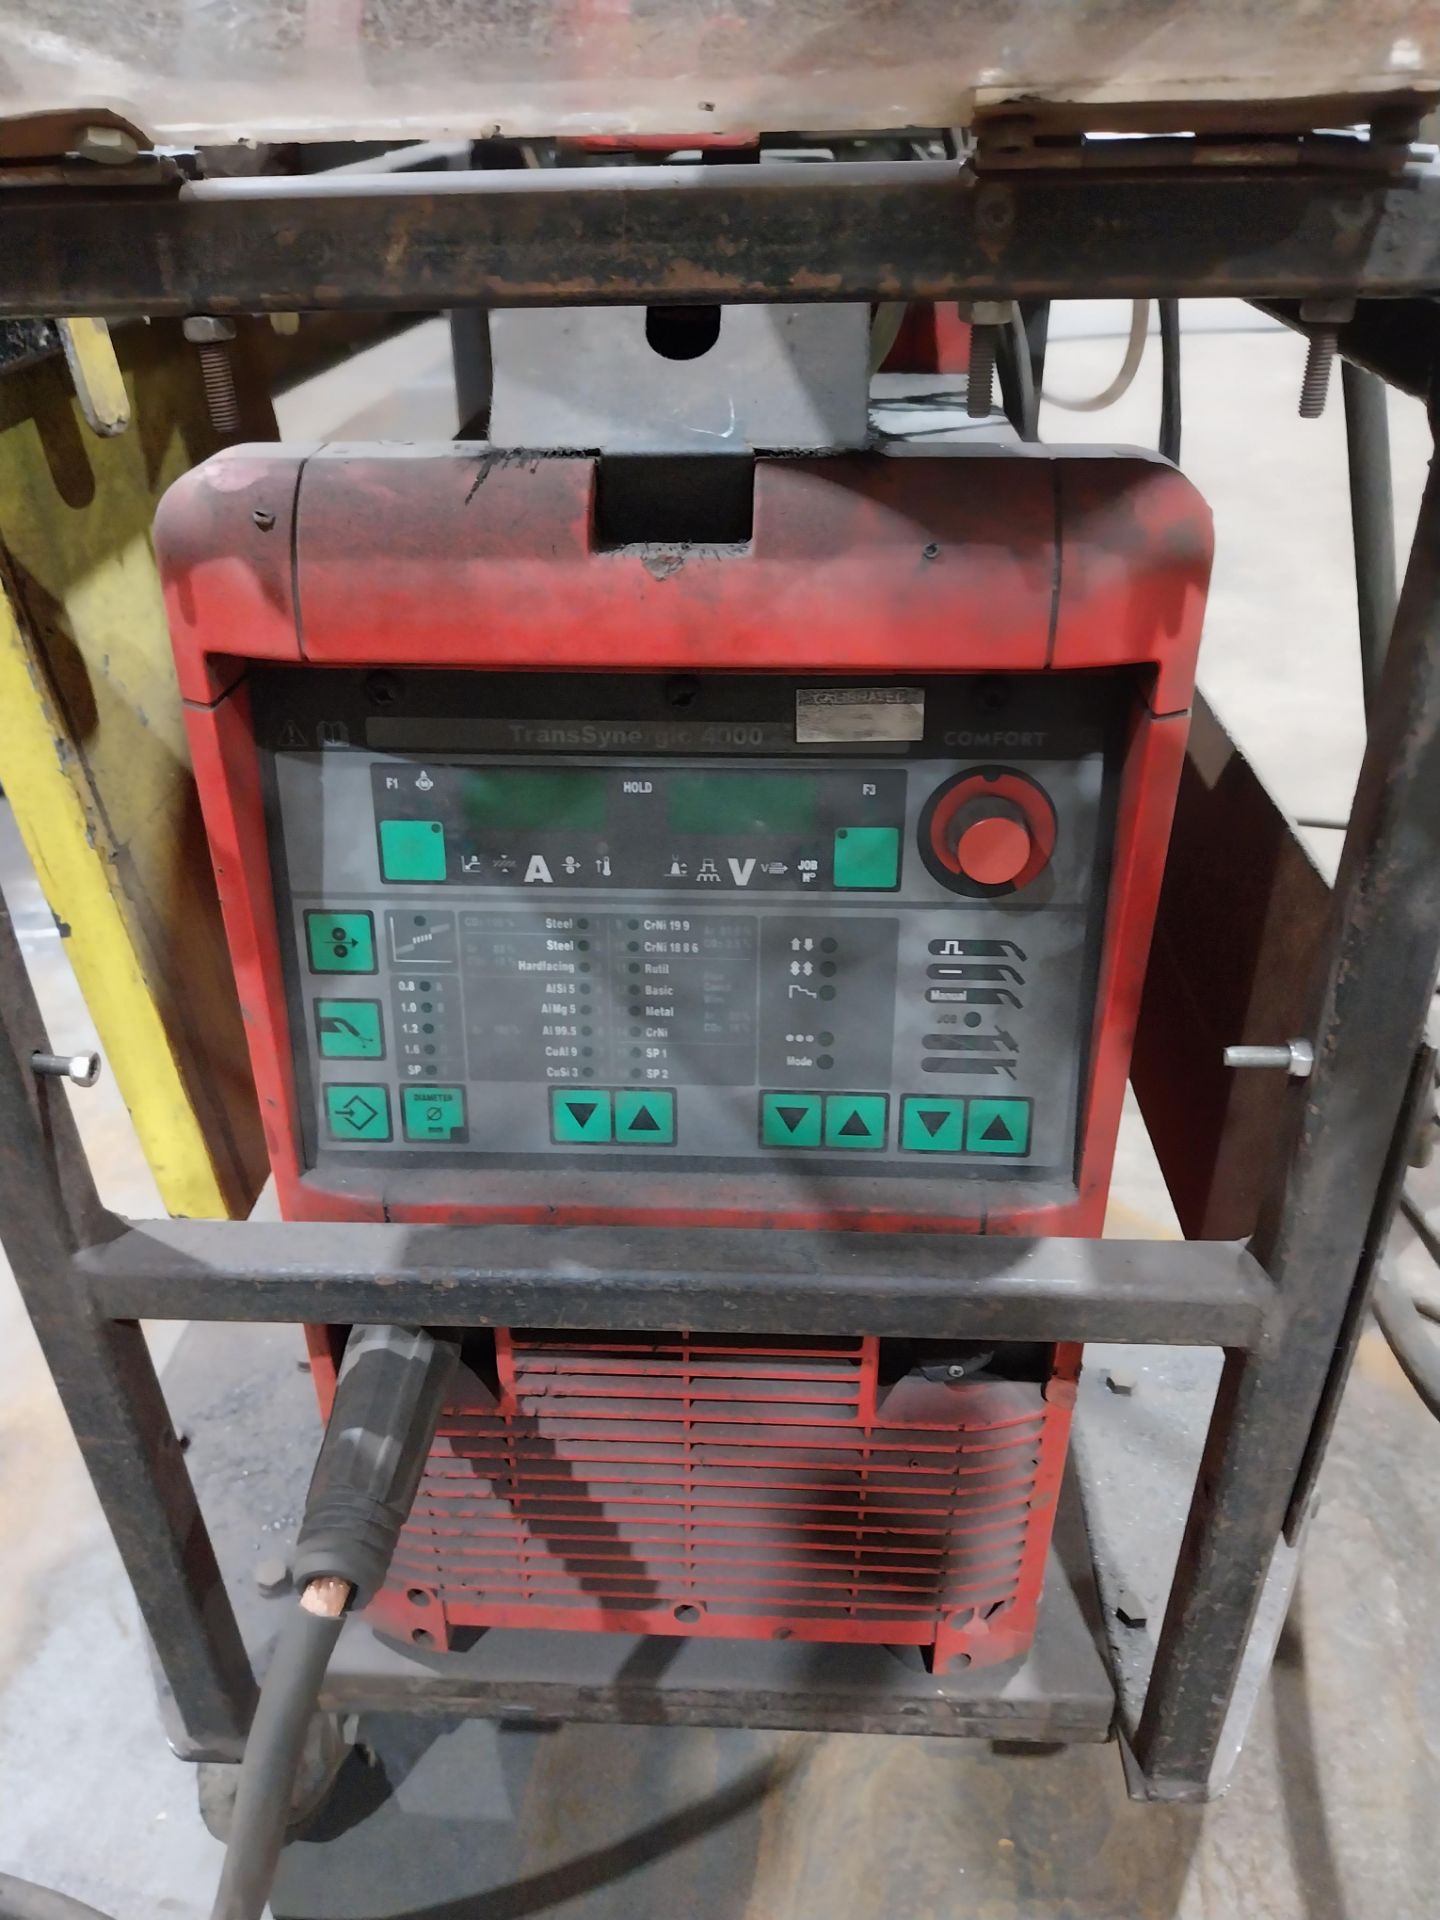 Fronius TransSynergic 4000 mig welder with VR4000 wire feed, torch and clamp (bottle not included) - Image 2 of 4